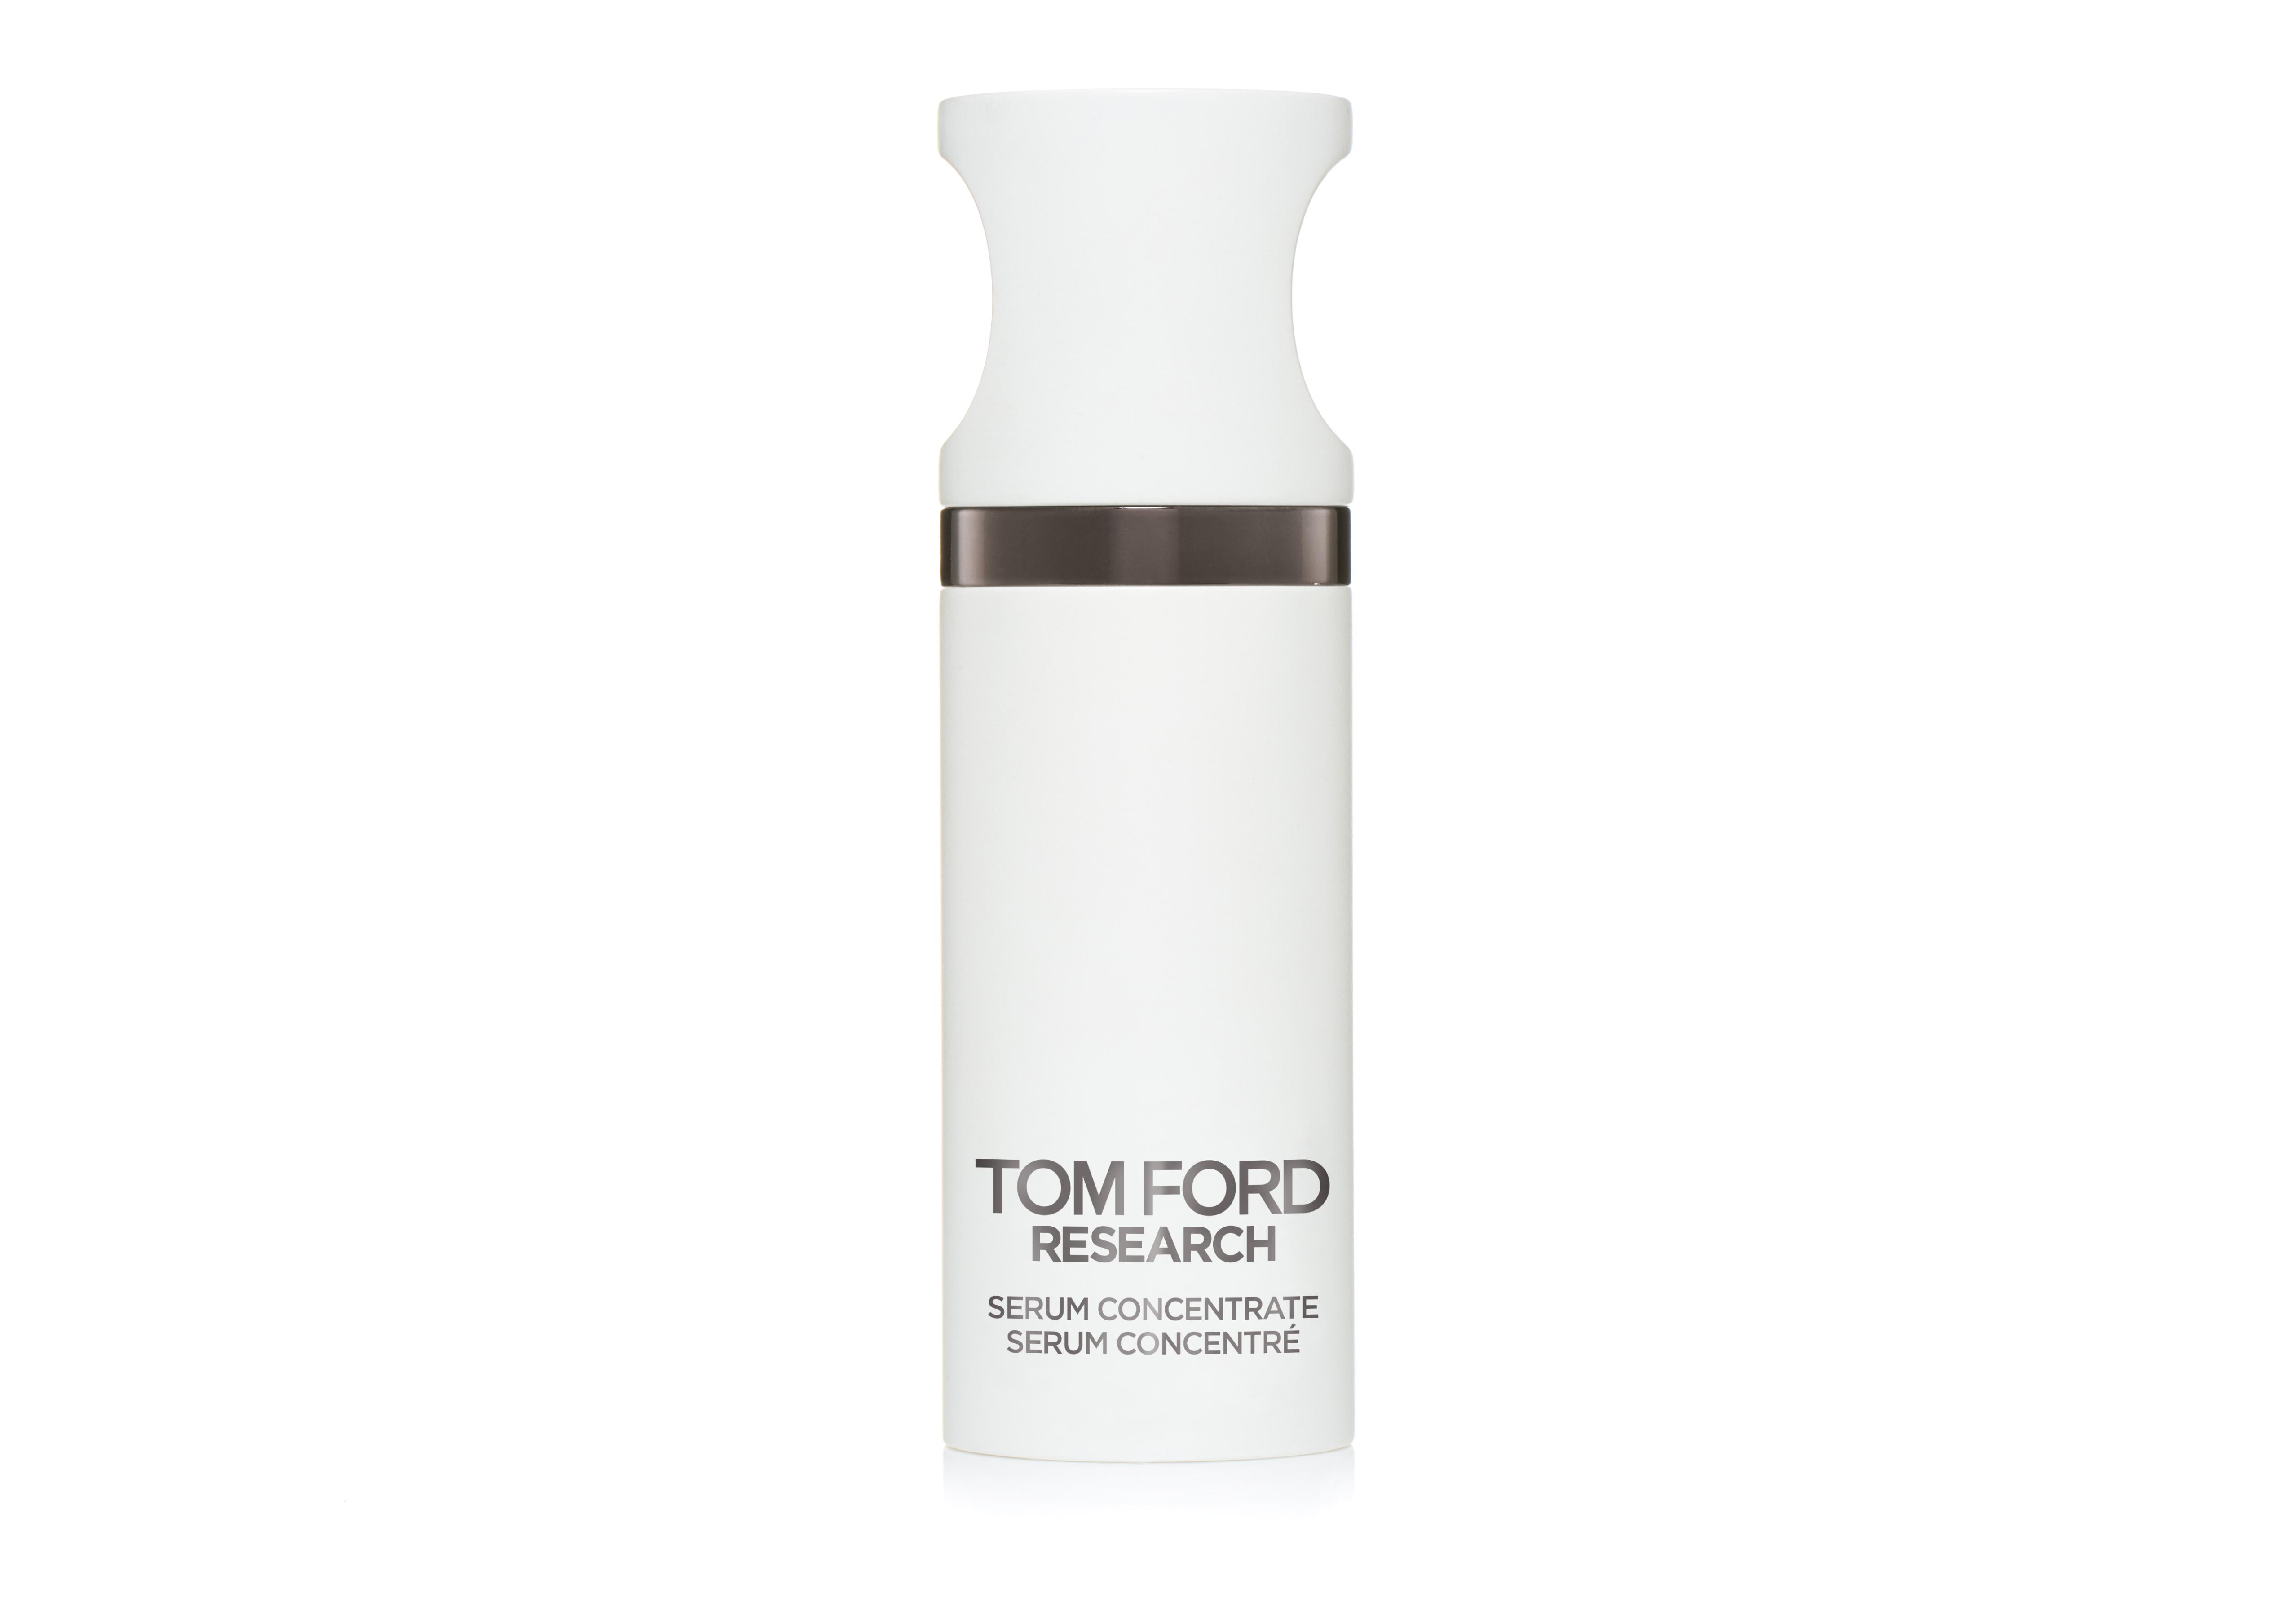 Tom Ford TOM FORD RESEARCH SERUM CONCENTRATE - Beauty 